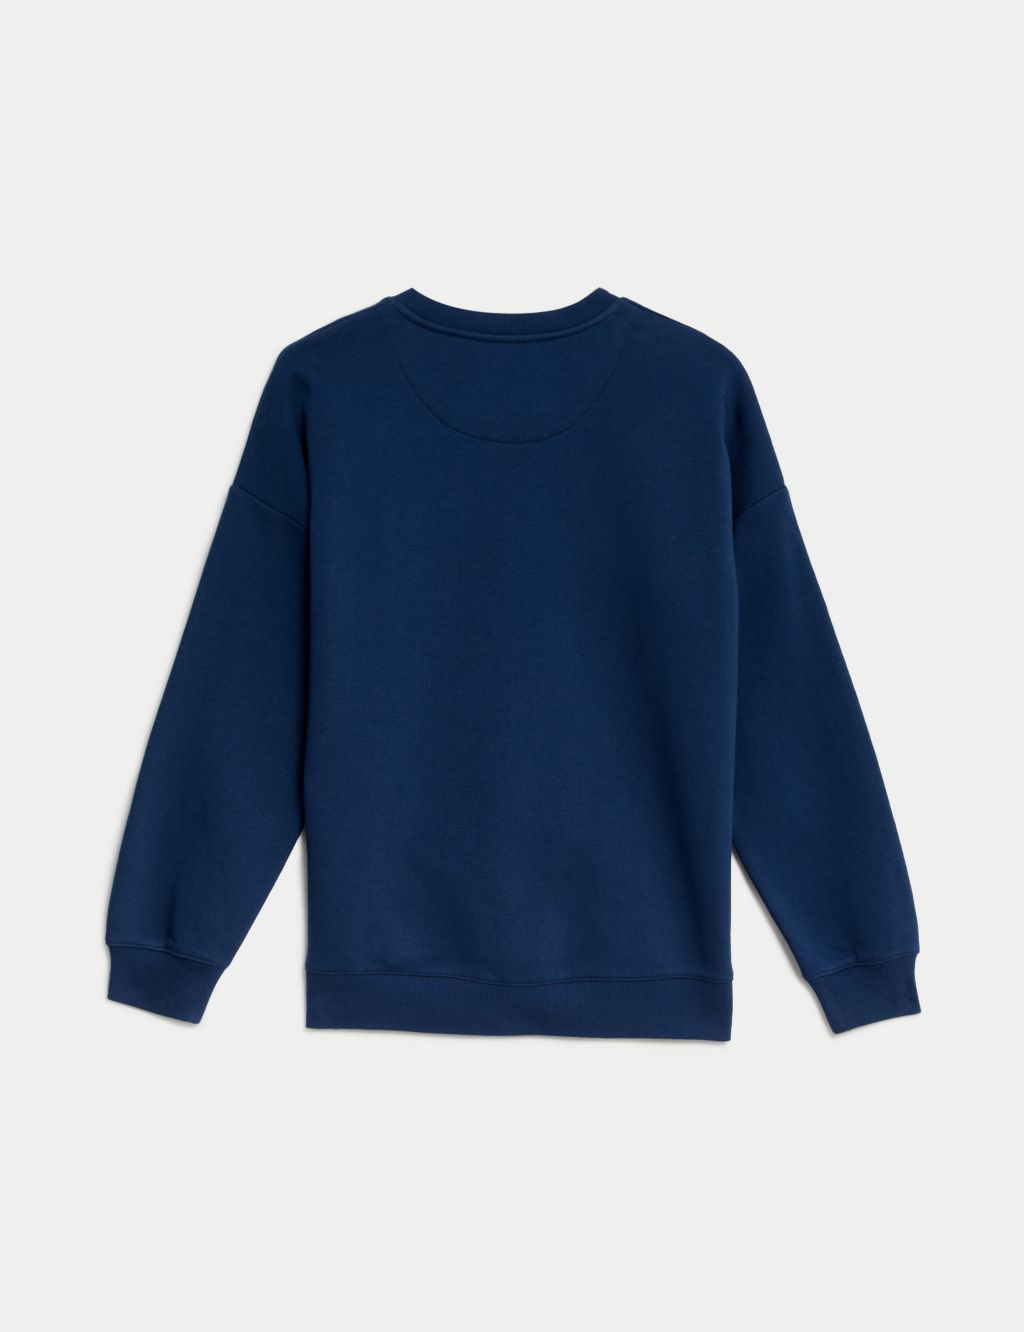 Cotton Rich Play Your End Game Sweatshirt (6-16 Yrs) image 3